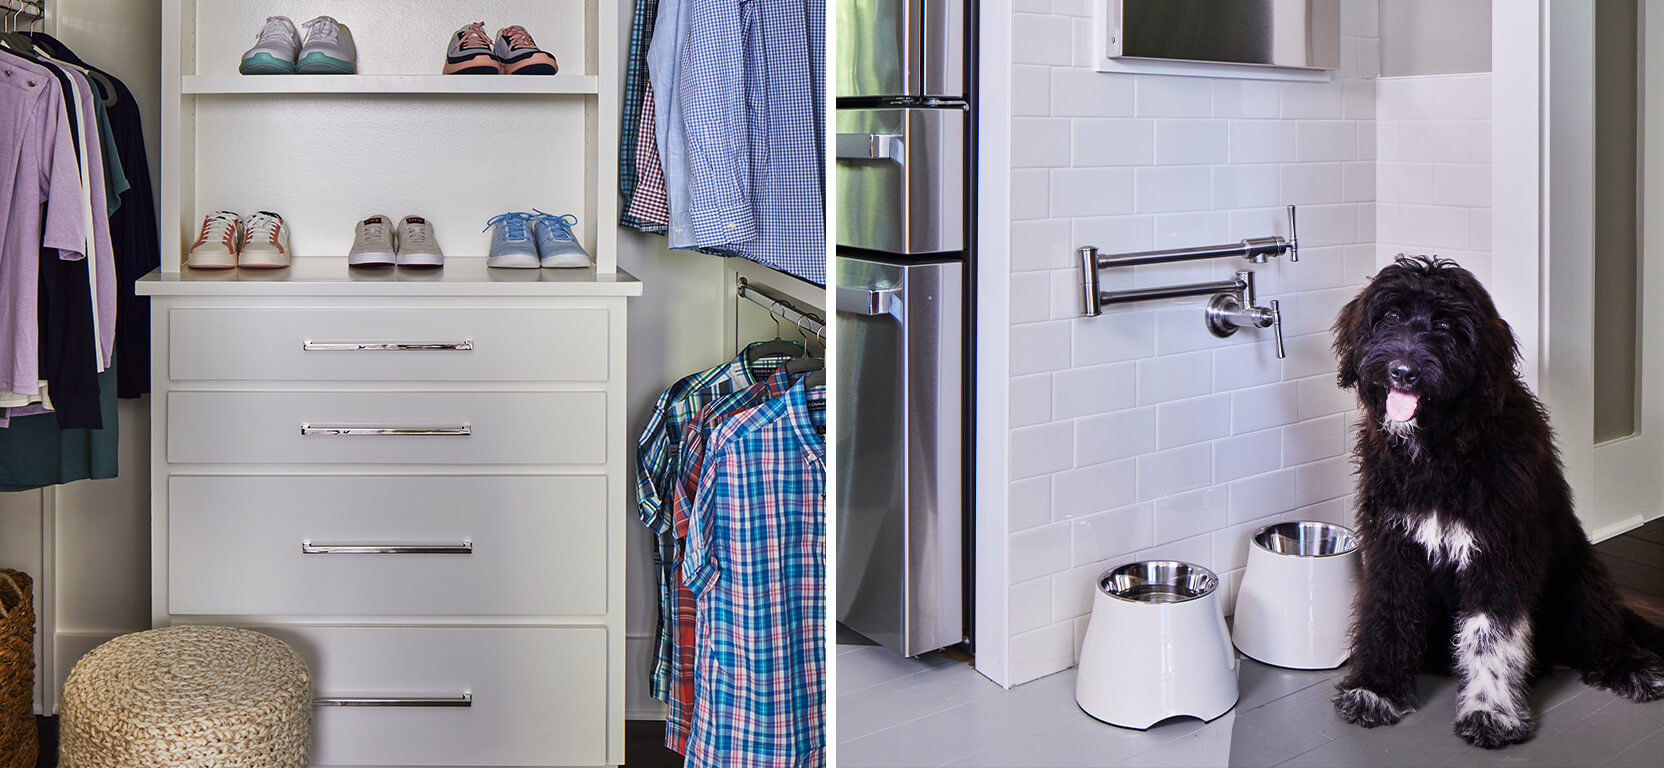 Left image: Built-in closet storage with easy-pull handles and clothing racks at sitting level.  Right image: Large, shaggy black dog sitting next to elevated food and water dishes beneath an easy pot-fill station installed in a subway tile wall.